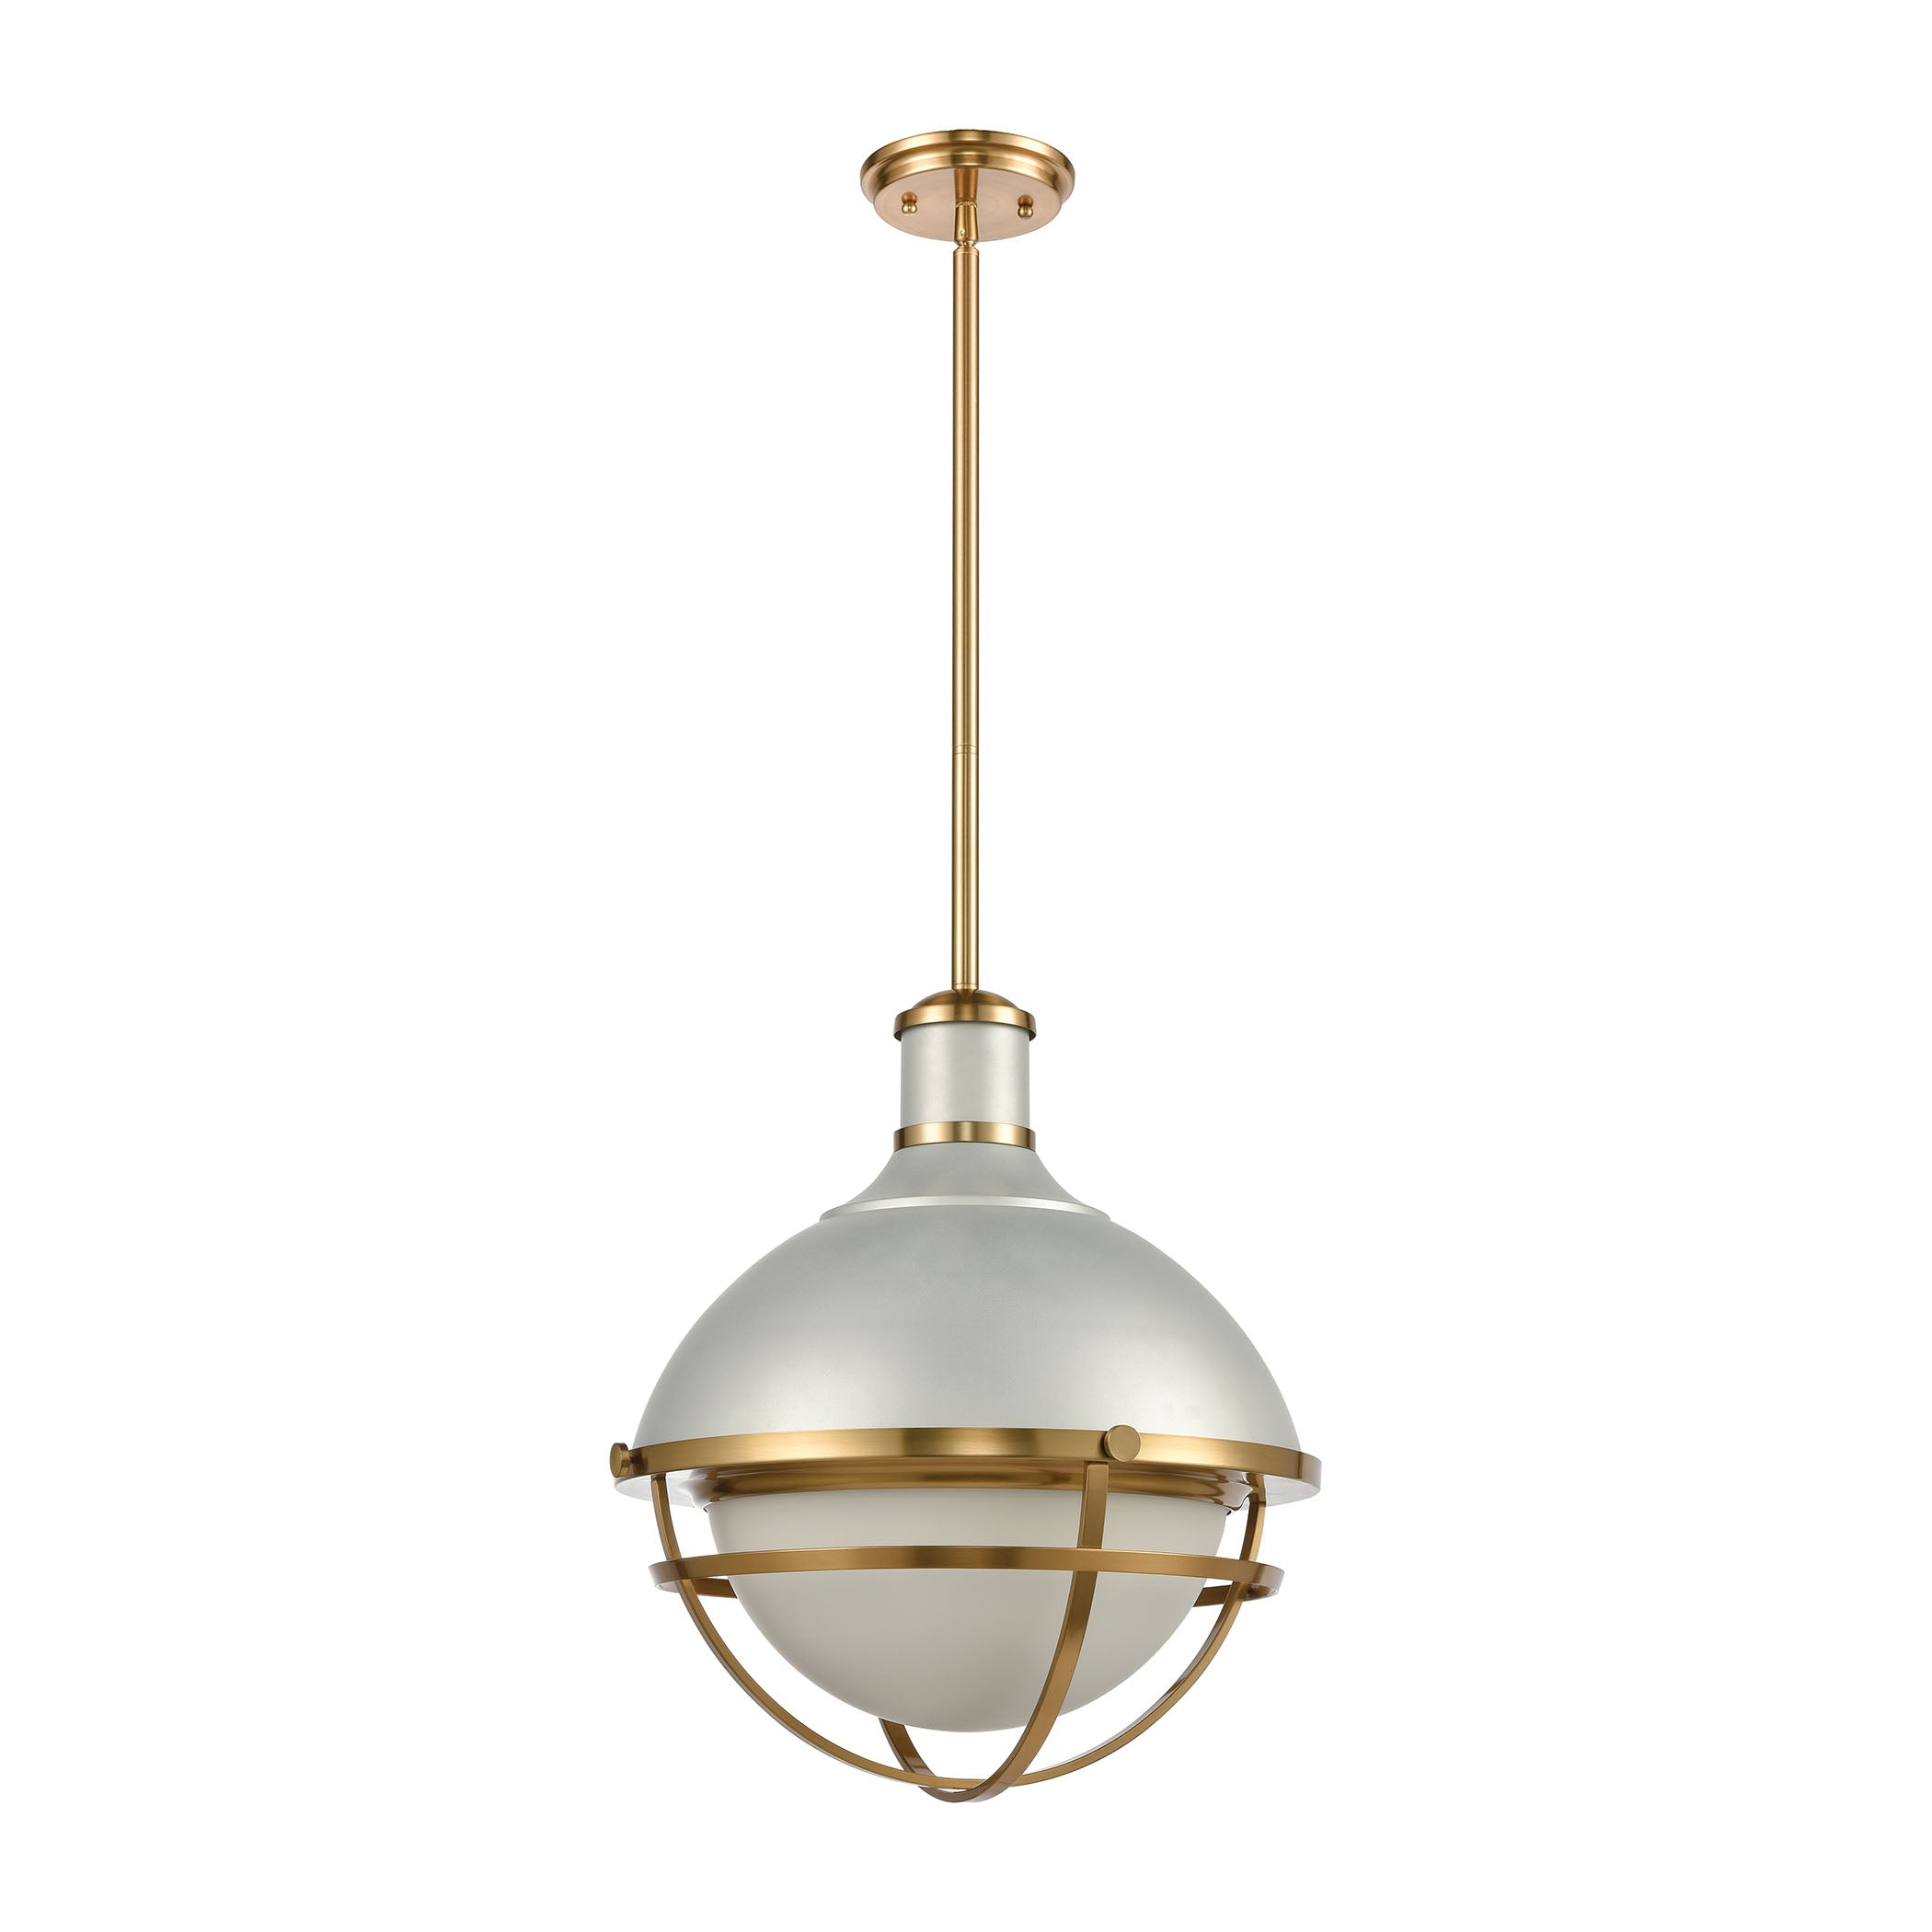 ELK Lighting 16565/1 Jenna 1-Light Pendant in Satin Silver and Satin Brass with Opal White Glass